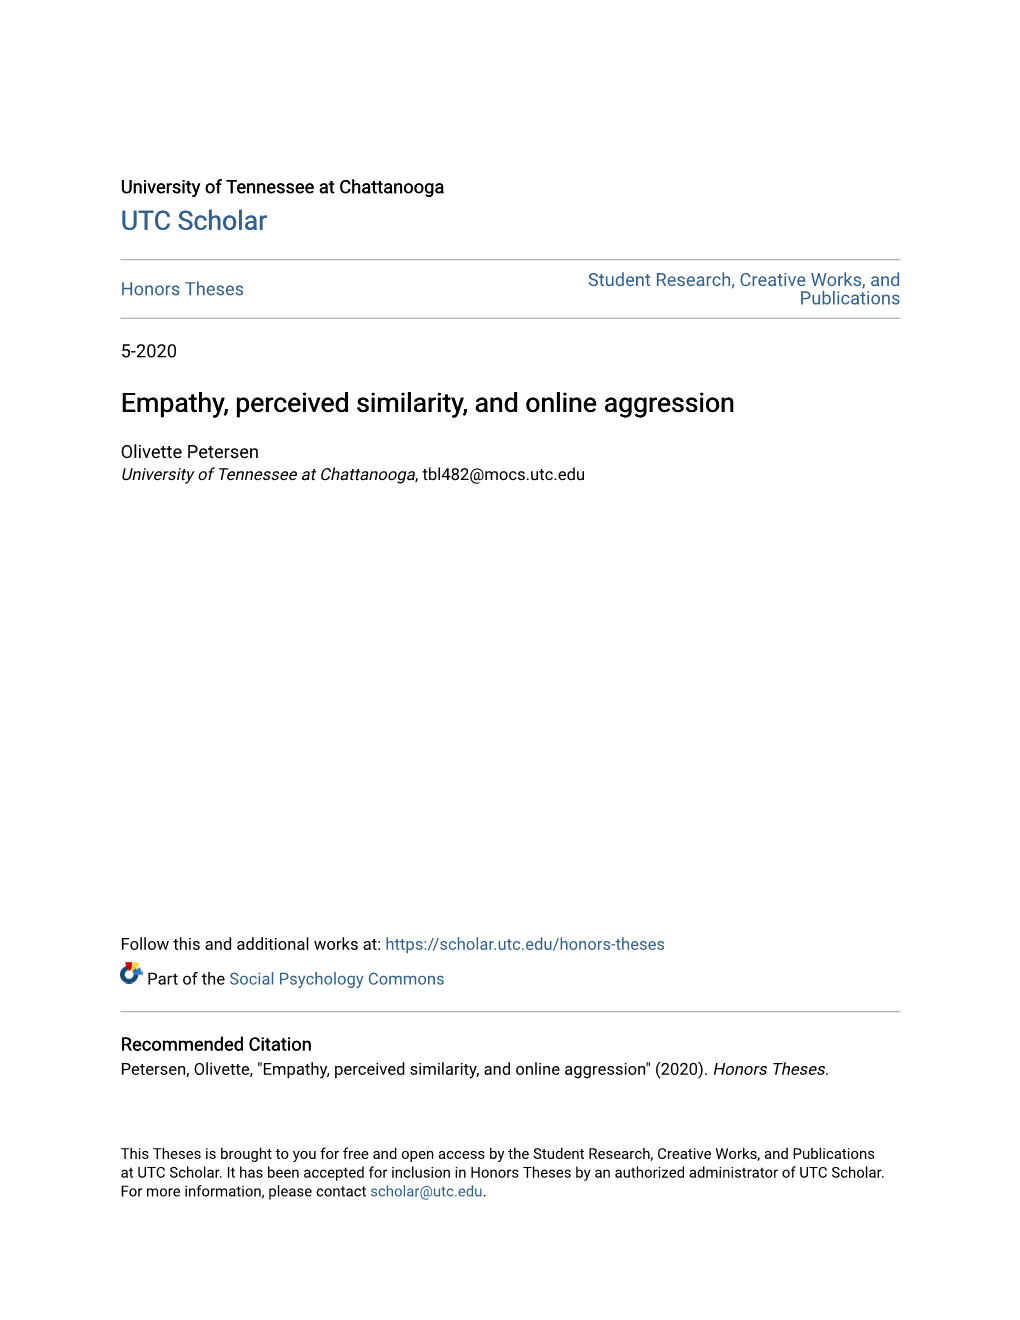 Empathy, Perceived Similarity, and Online Aggression